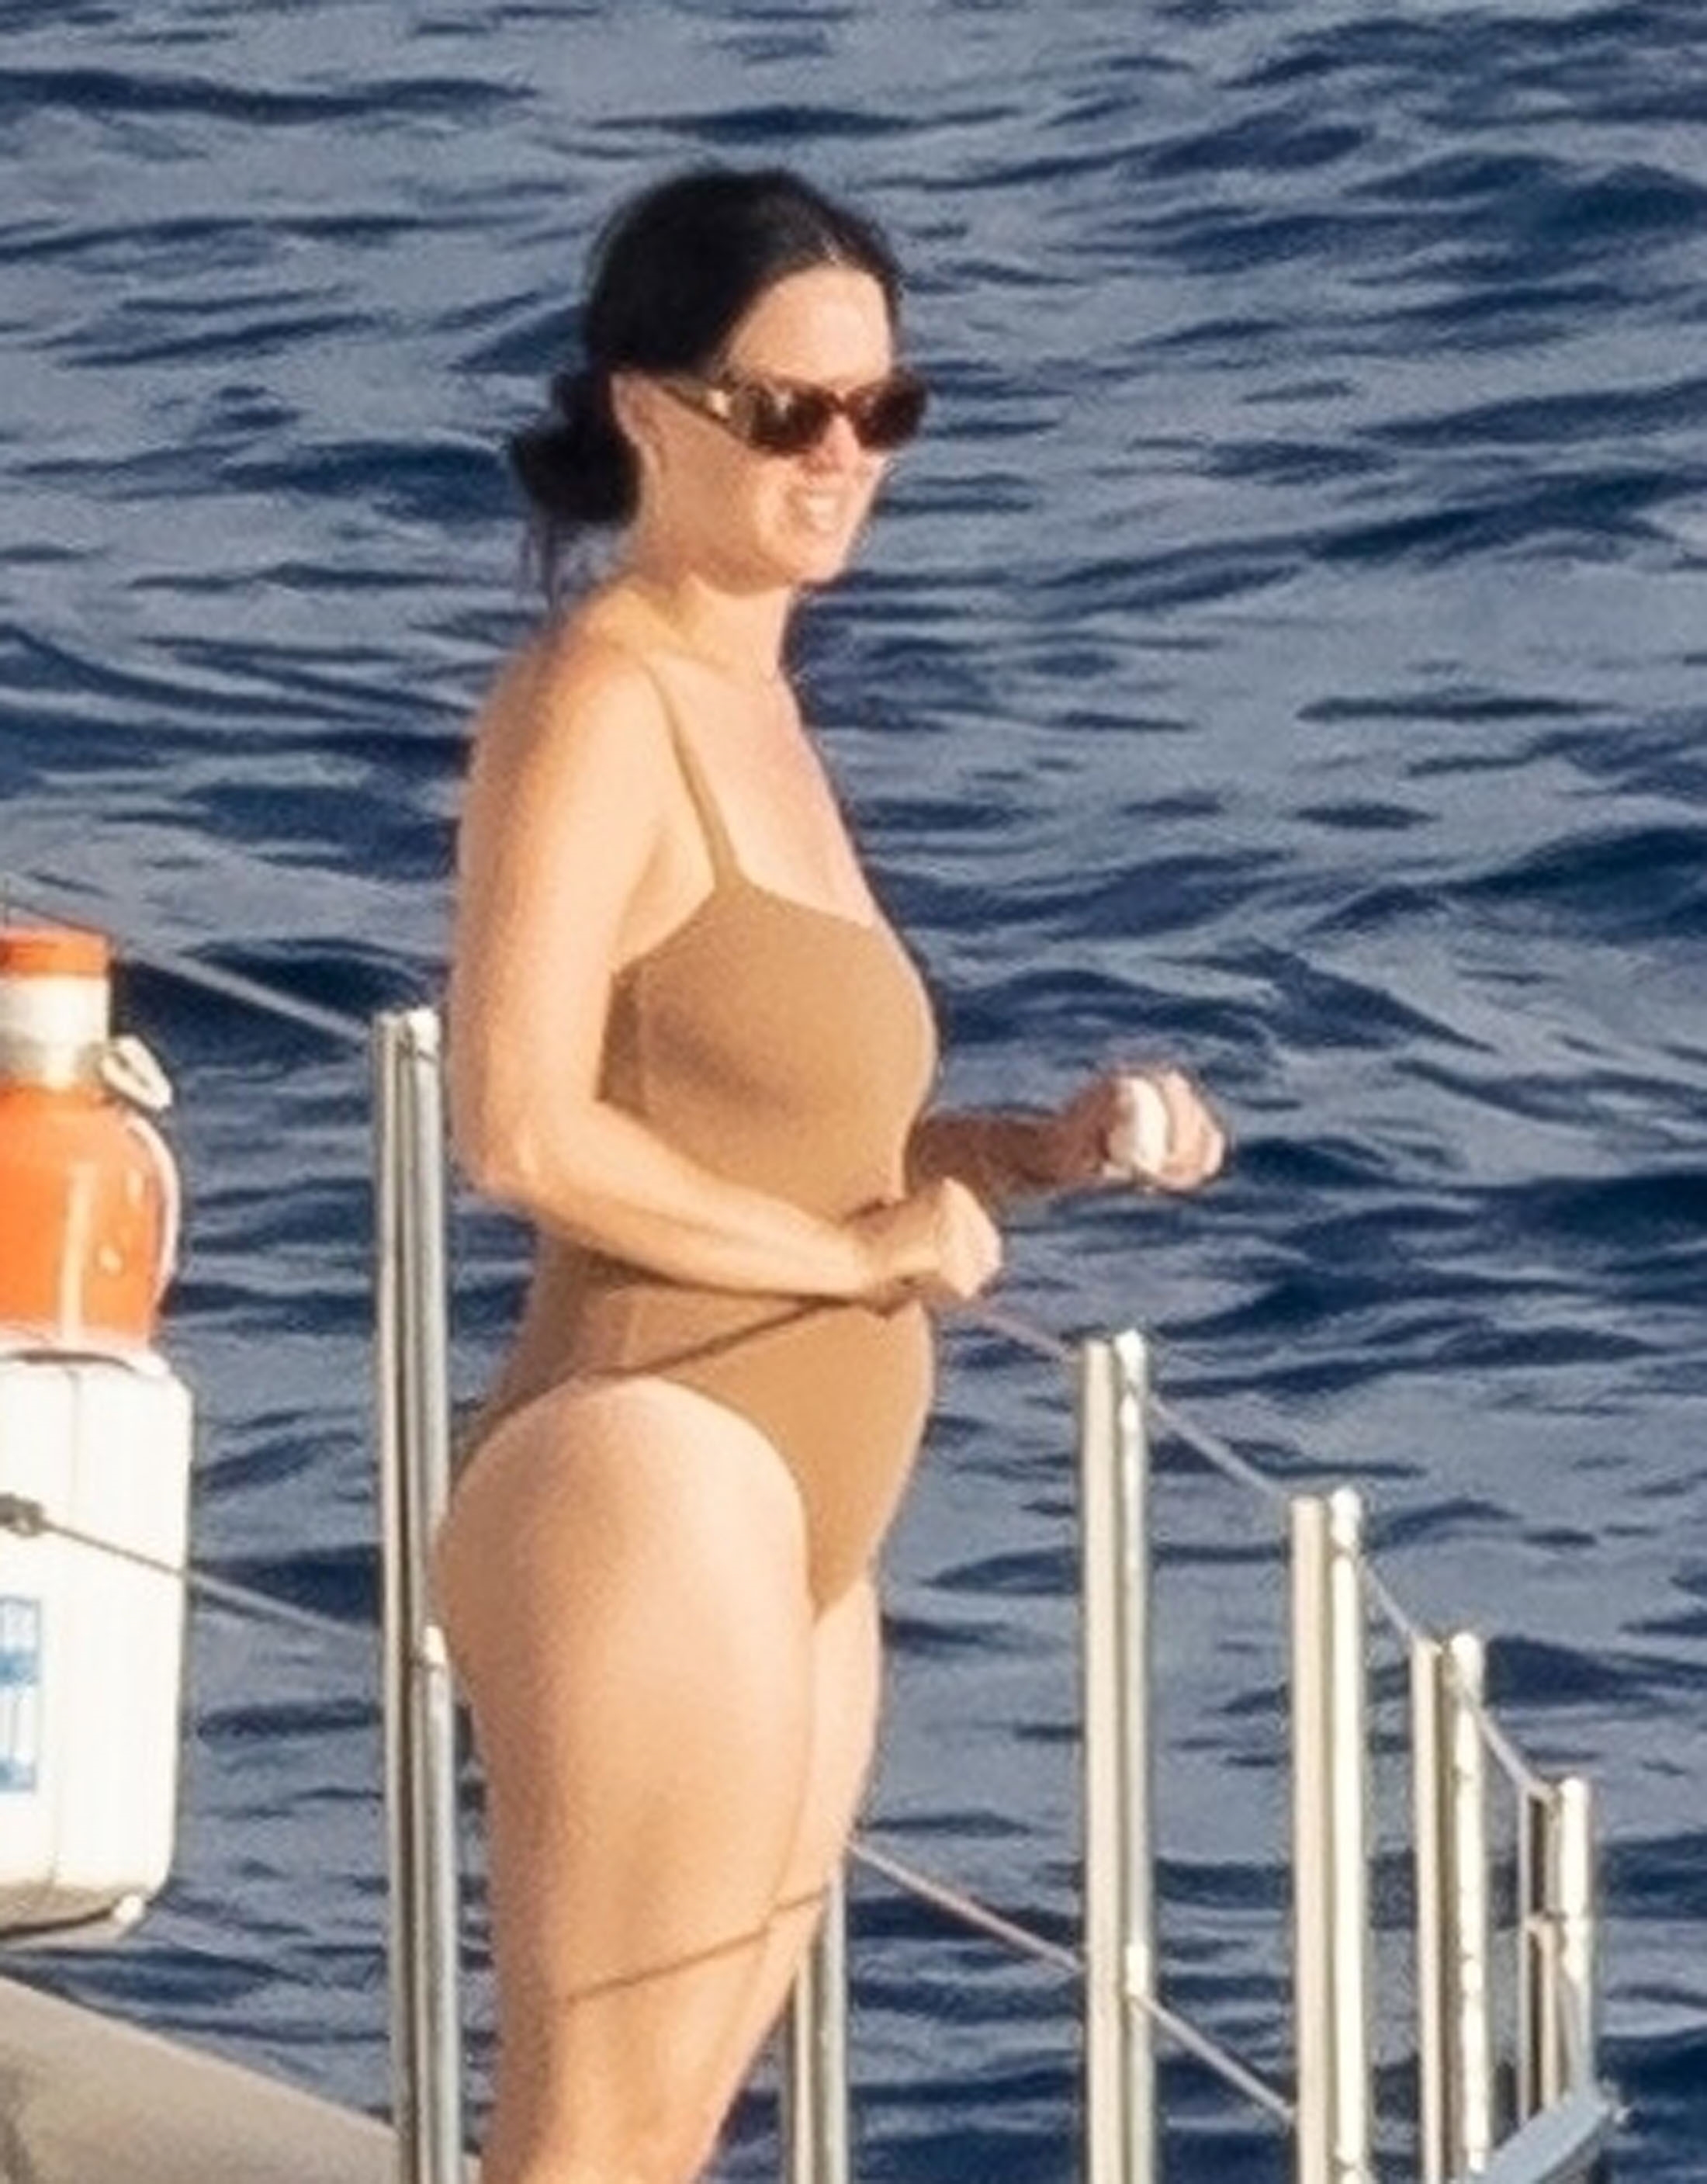 American singer Katy Perry spent a quiet afternoon with her partner Orlando Bloom.  The family is on vacation on a luxury yacht in Nerano, Italy